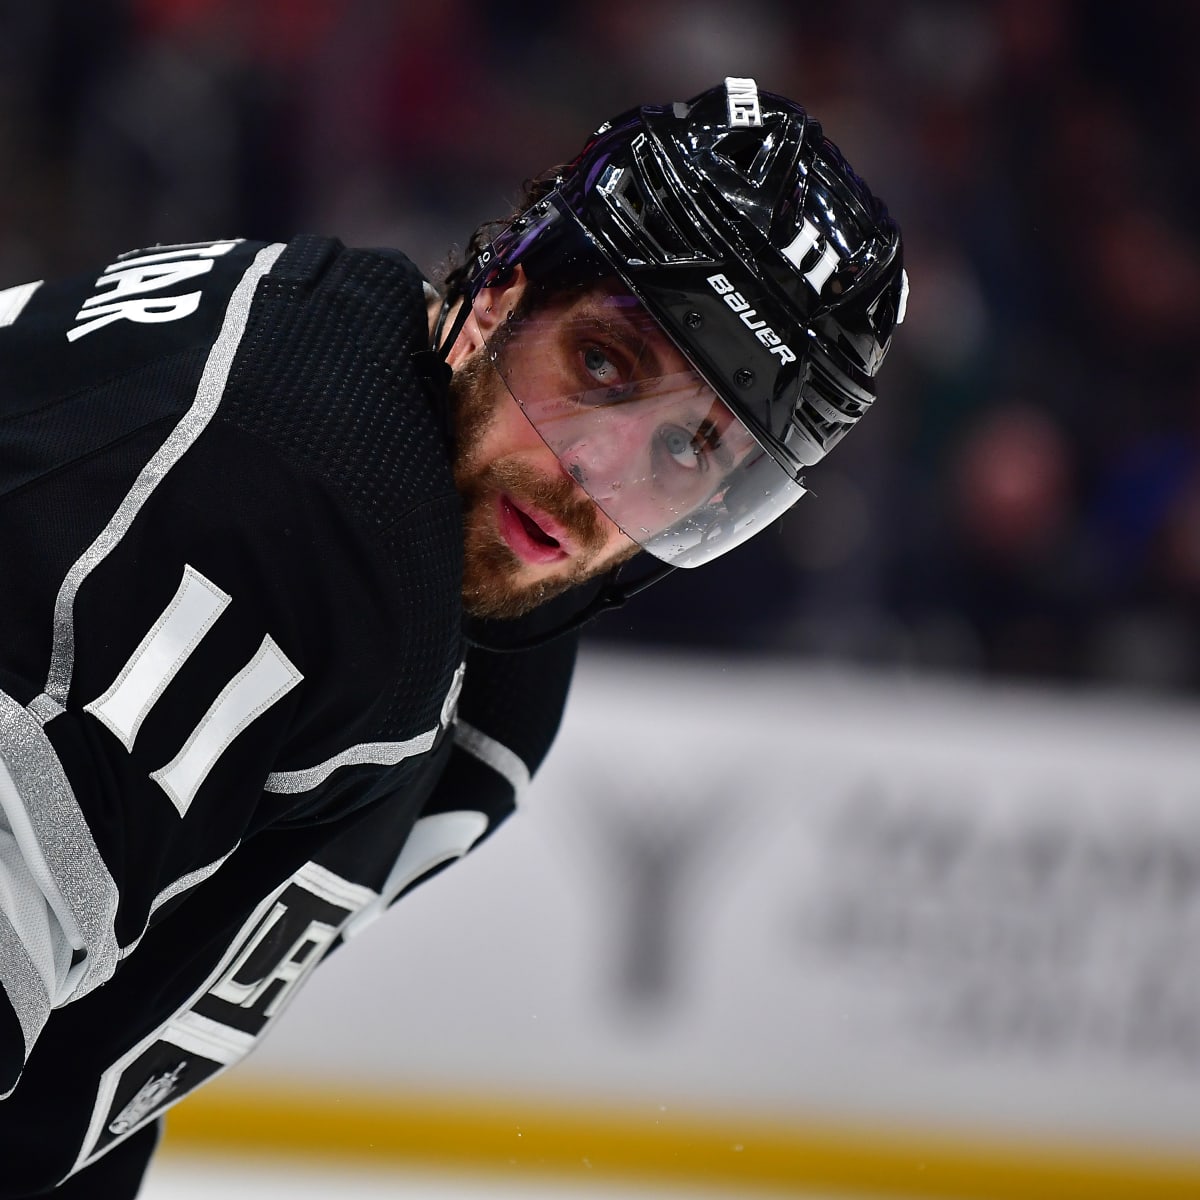 Anze Kopitar Continues To Power Kings As His Team Faces Bruins